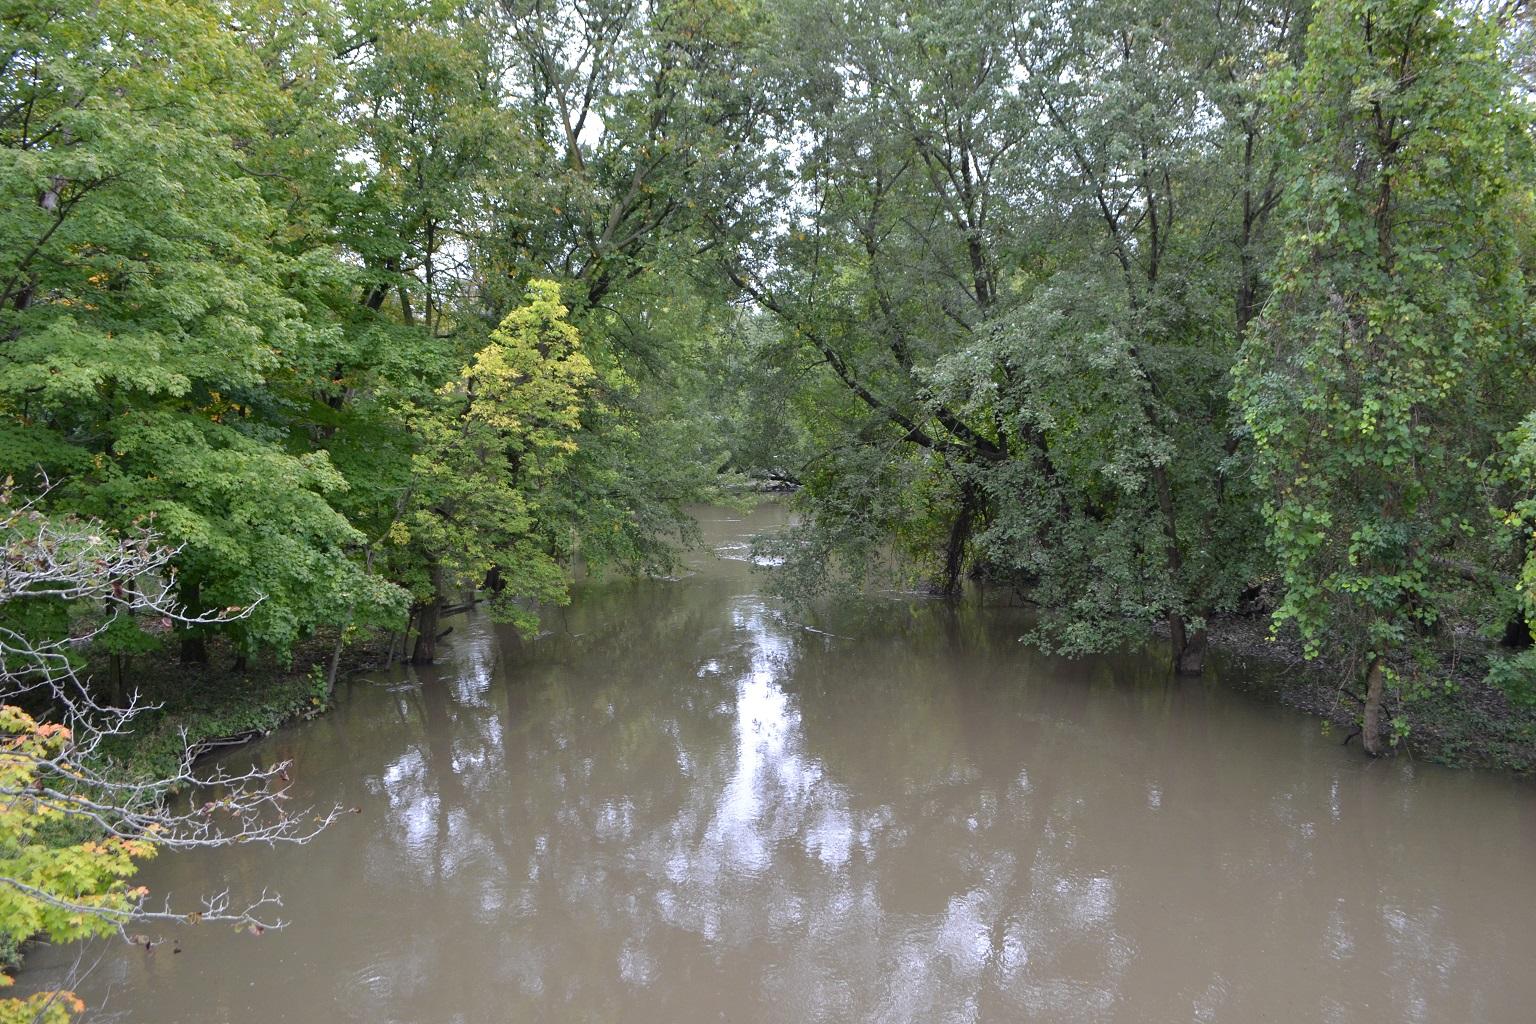 A section of the North Branch of the Chicago River in Edgebrook on Oct. 2, 2018 (Alex Ruppenthal / Chicago Tonight)